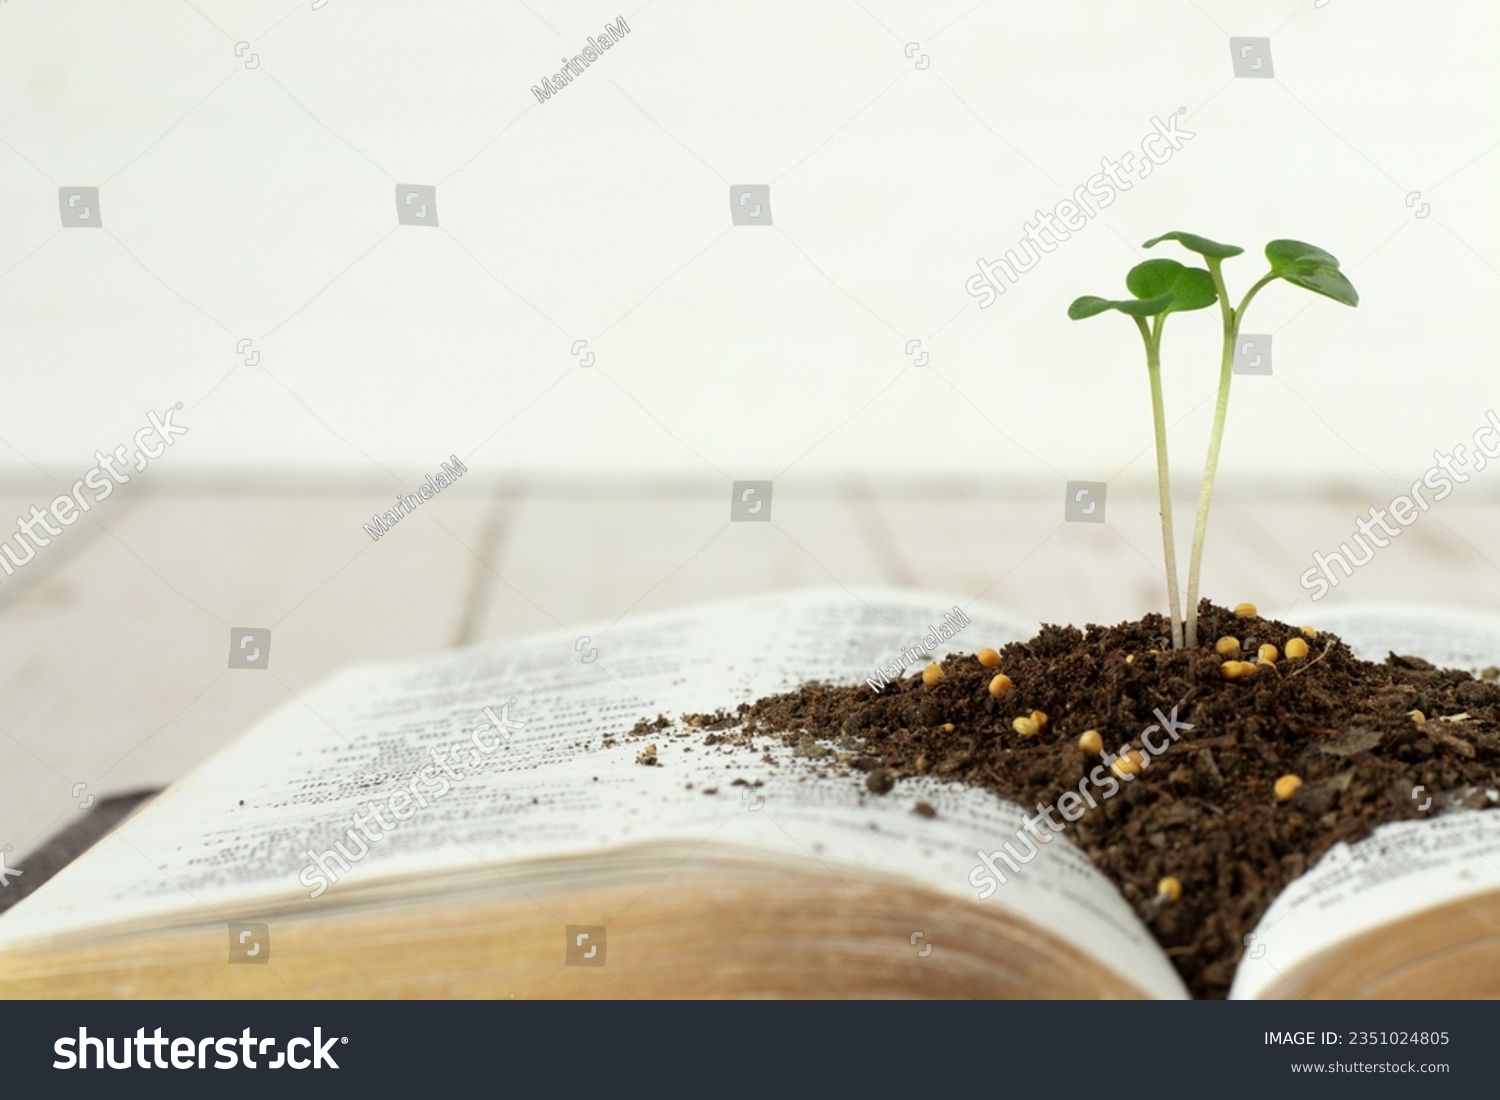 Mustard seed green plant growing in soil on top of open Holy Bible Book with golden pages and white background. Copy space. Close-up. Christian faith, maturity, spiritual growth, biblical concept. #2351024805